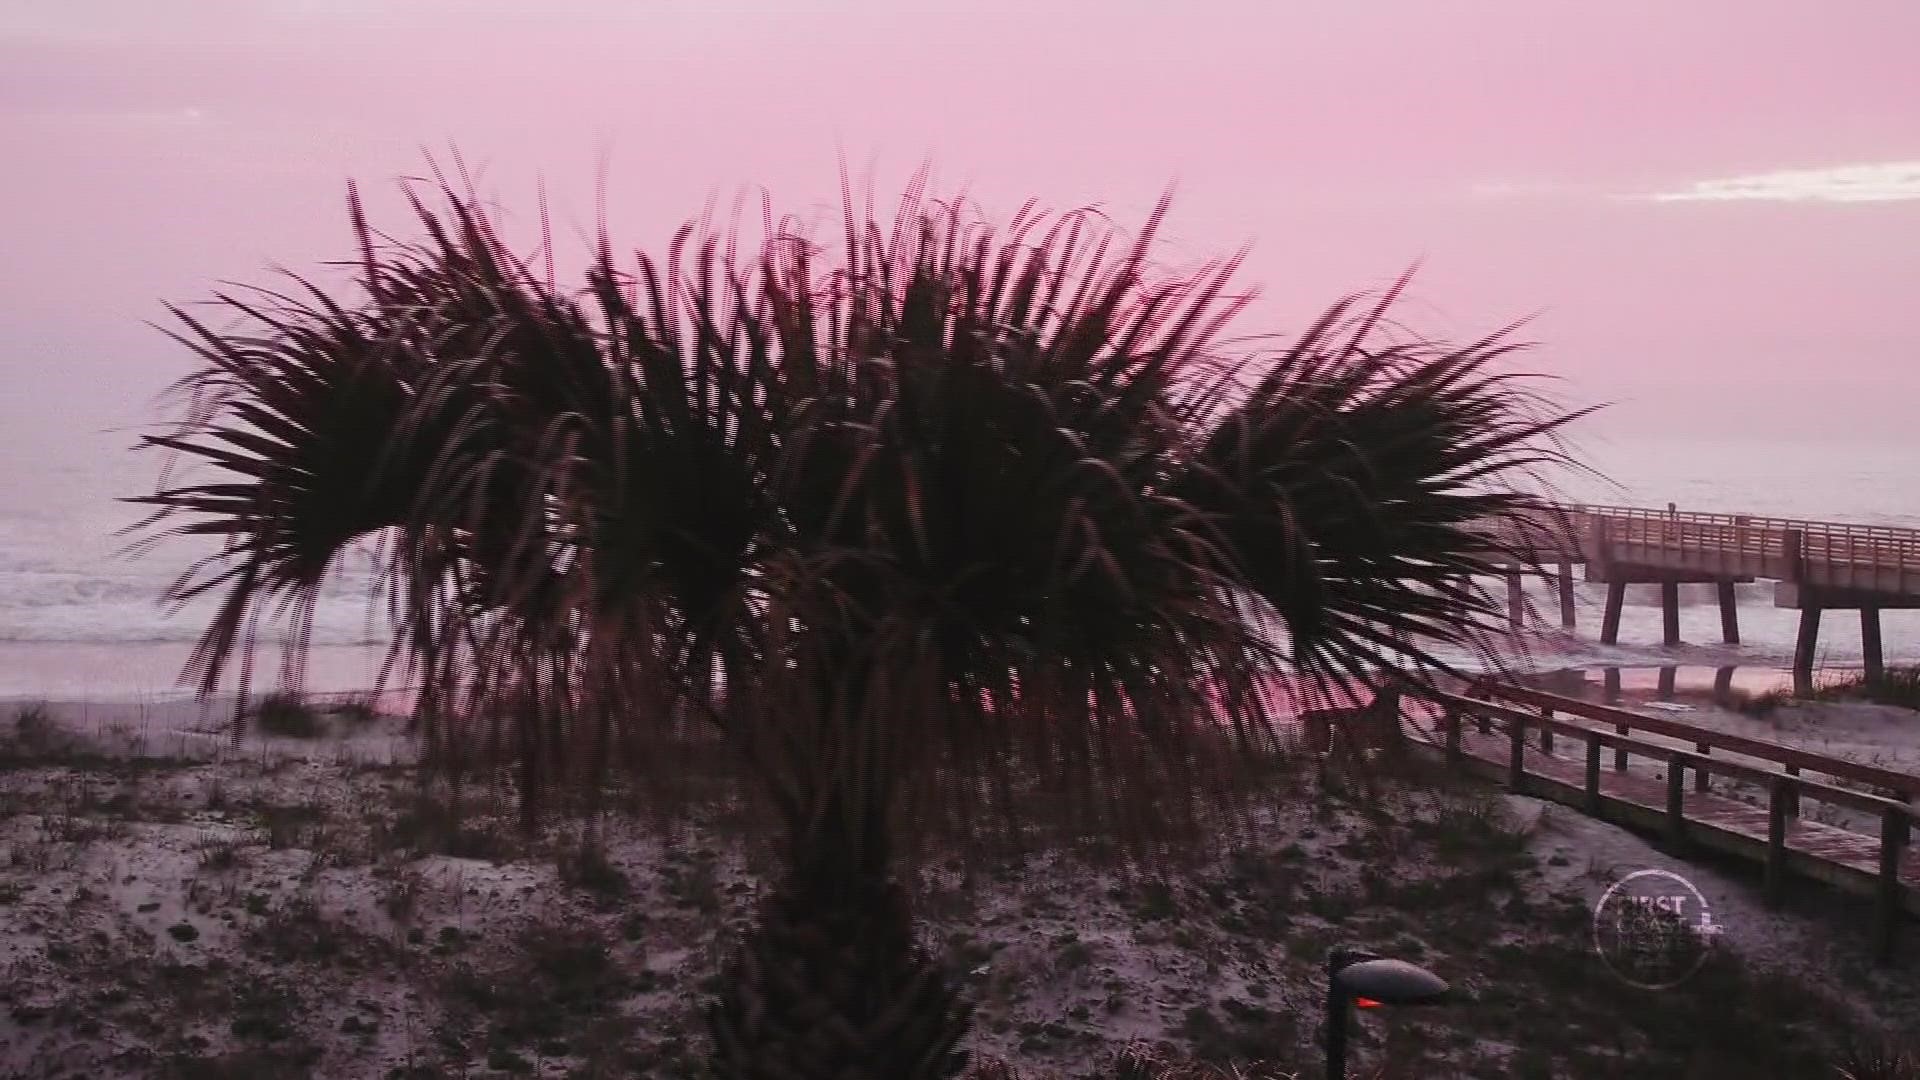 Jacksonville Beach is beautiful any time of day as this video displays.